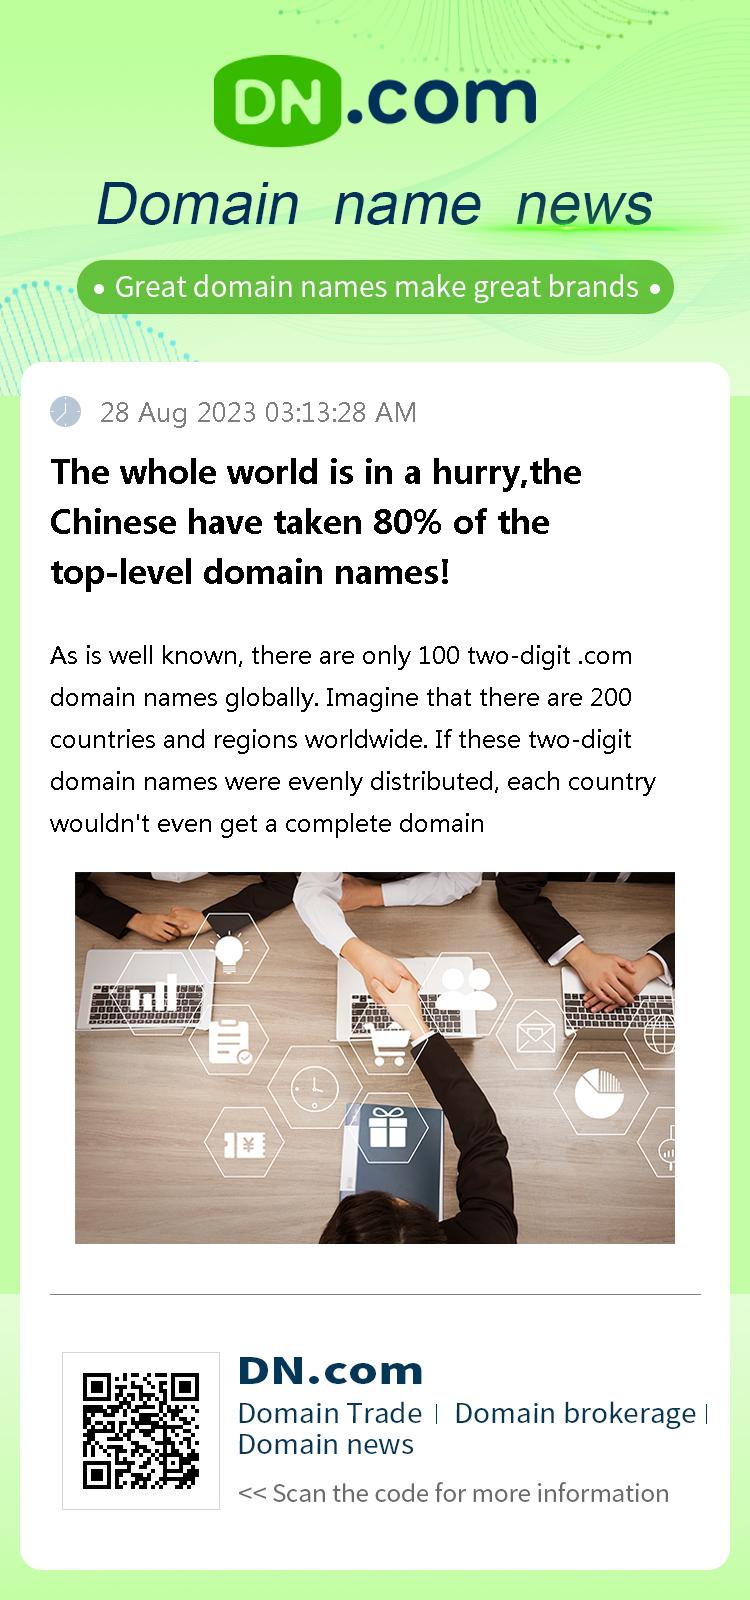 The whole world is in a hurry,the Chinese have taken 80% of the top-level domain names!